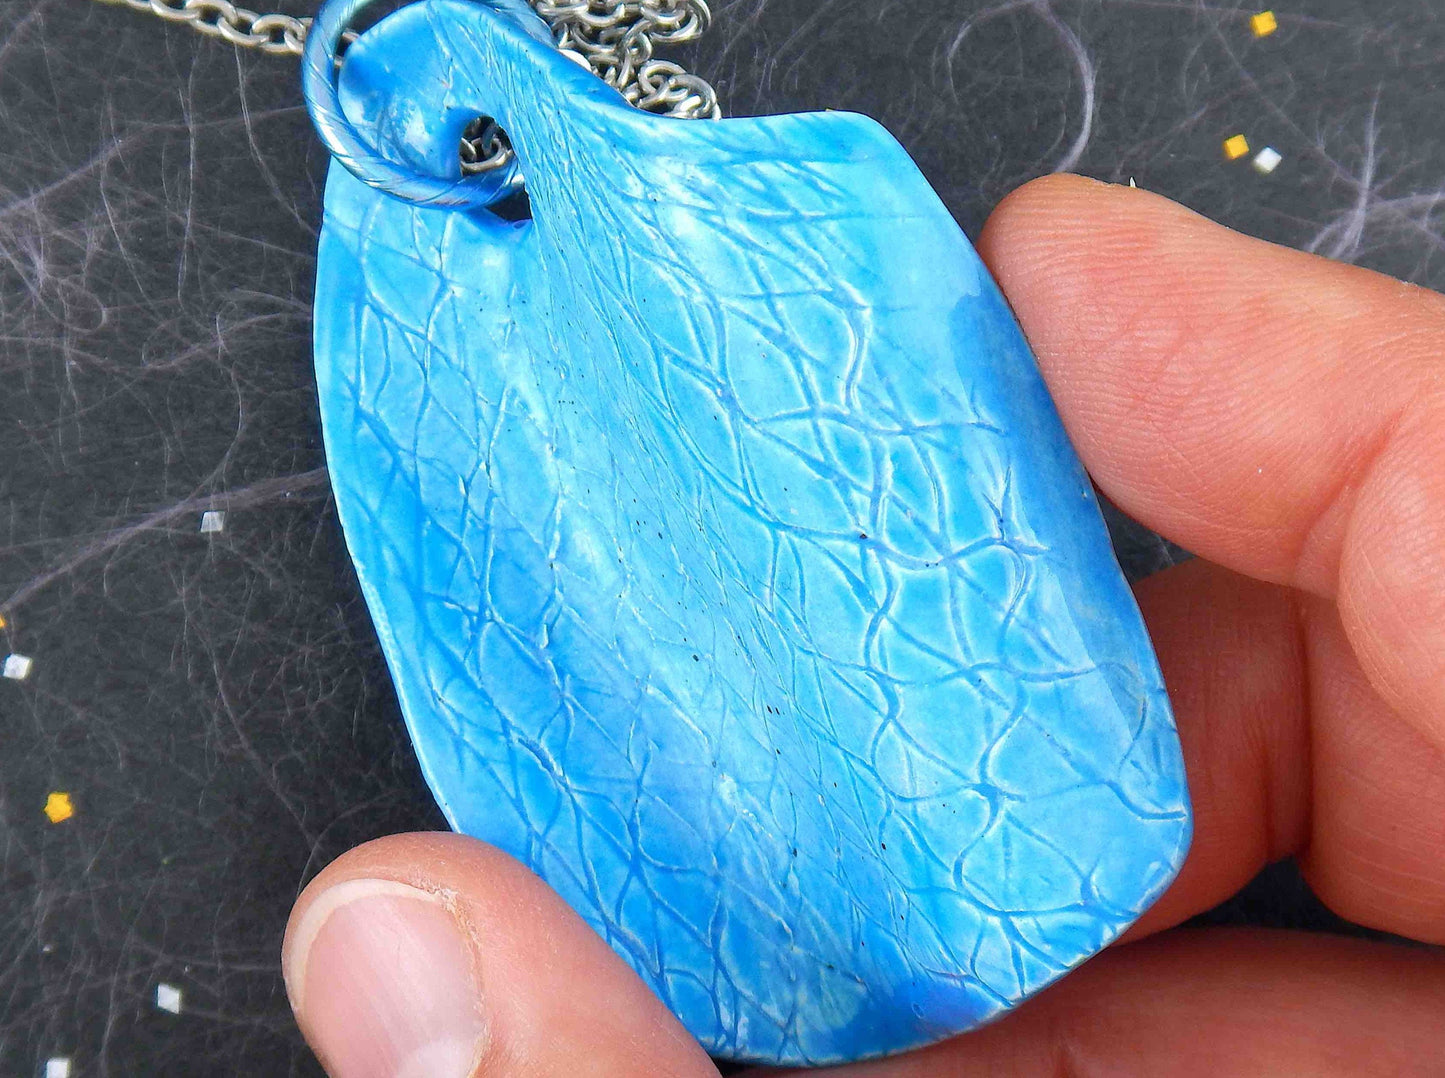 22-inch necklace with large textured bright turquoise wave ceramic pendant handmade in Montreal, stainless steel chain